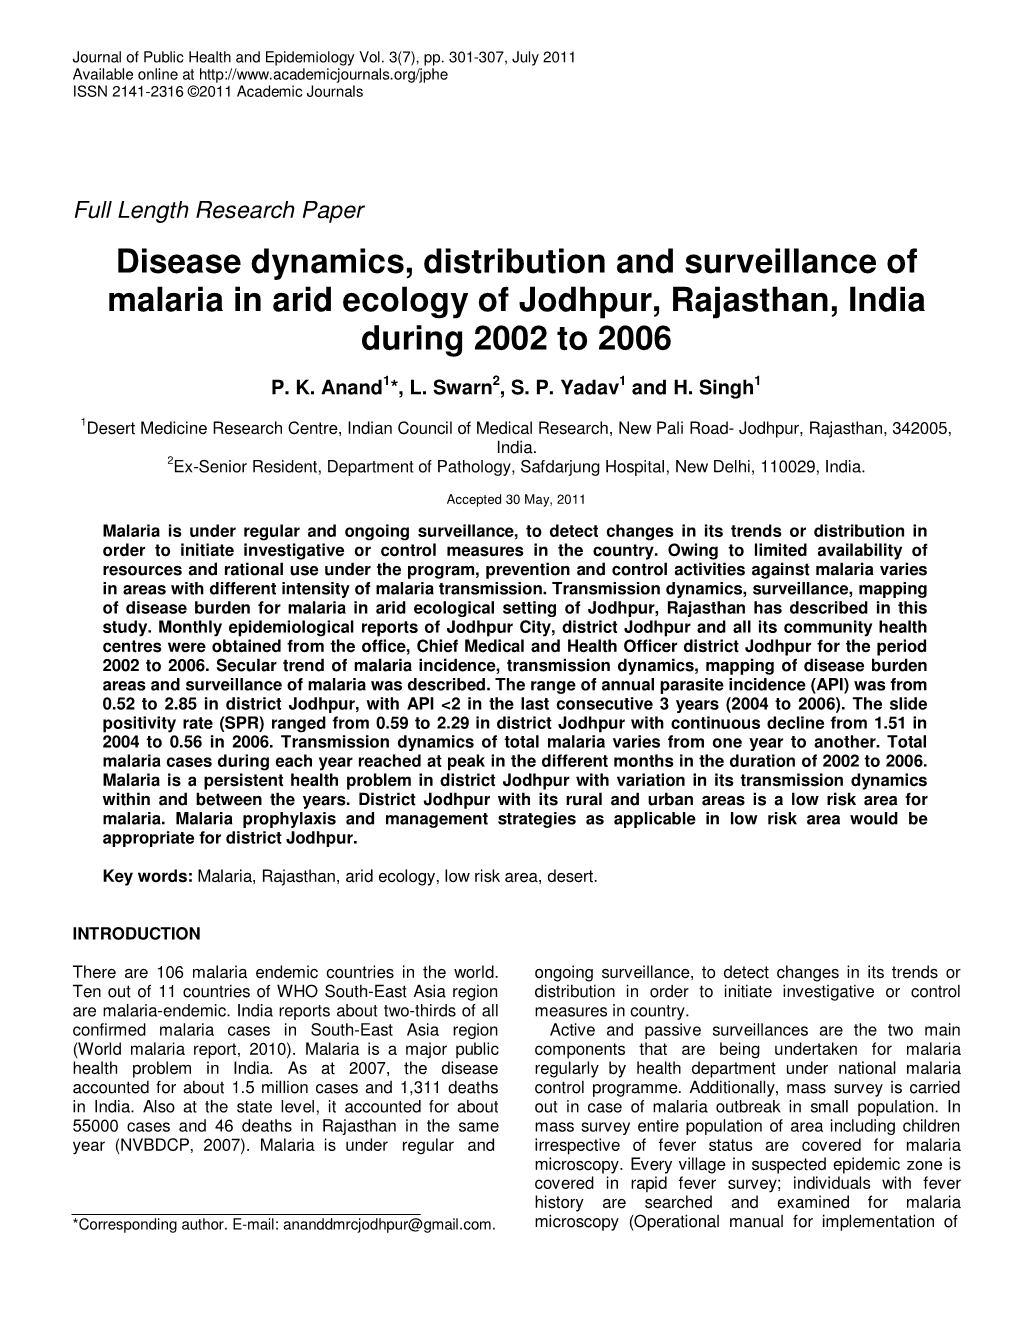 Disease Dynamics, Distribution and Surveillance of Malaria in Arid Ecology of Jodhpur, Rajasthan, India During 2002 to 2006